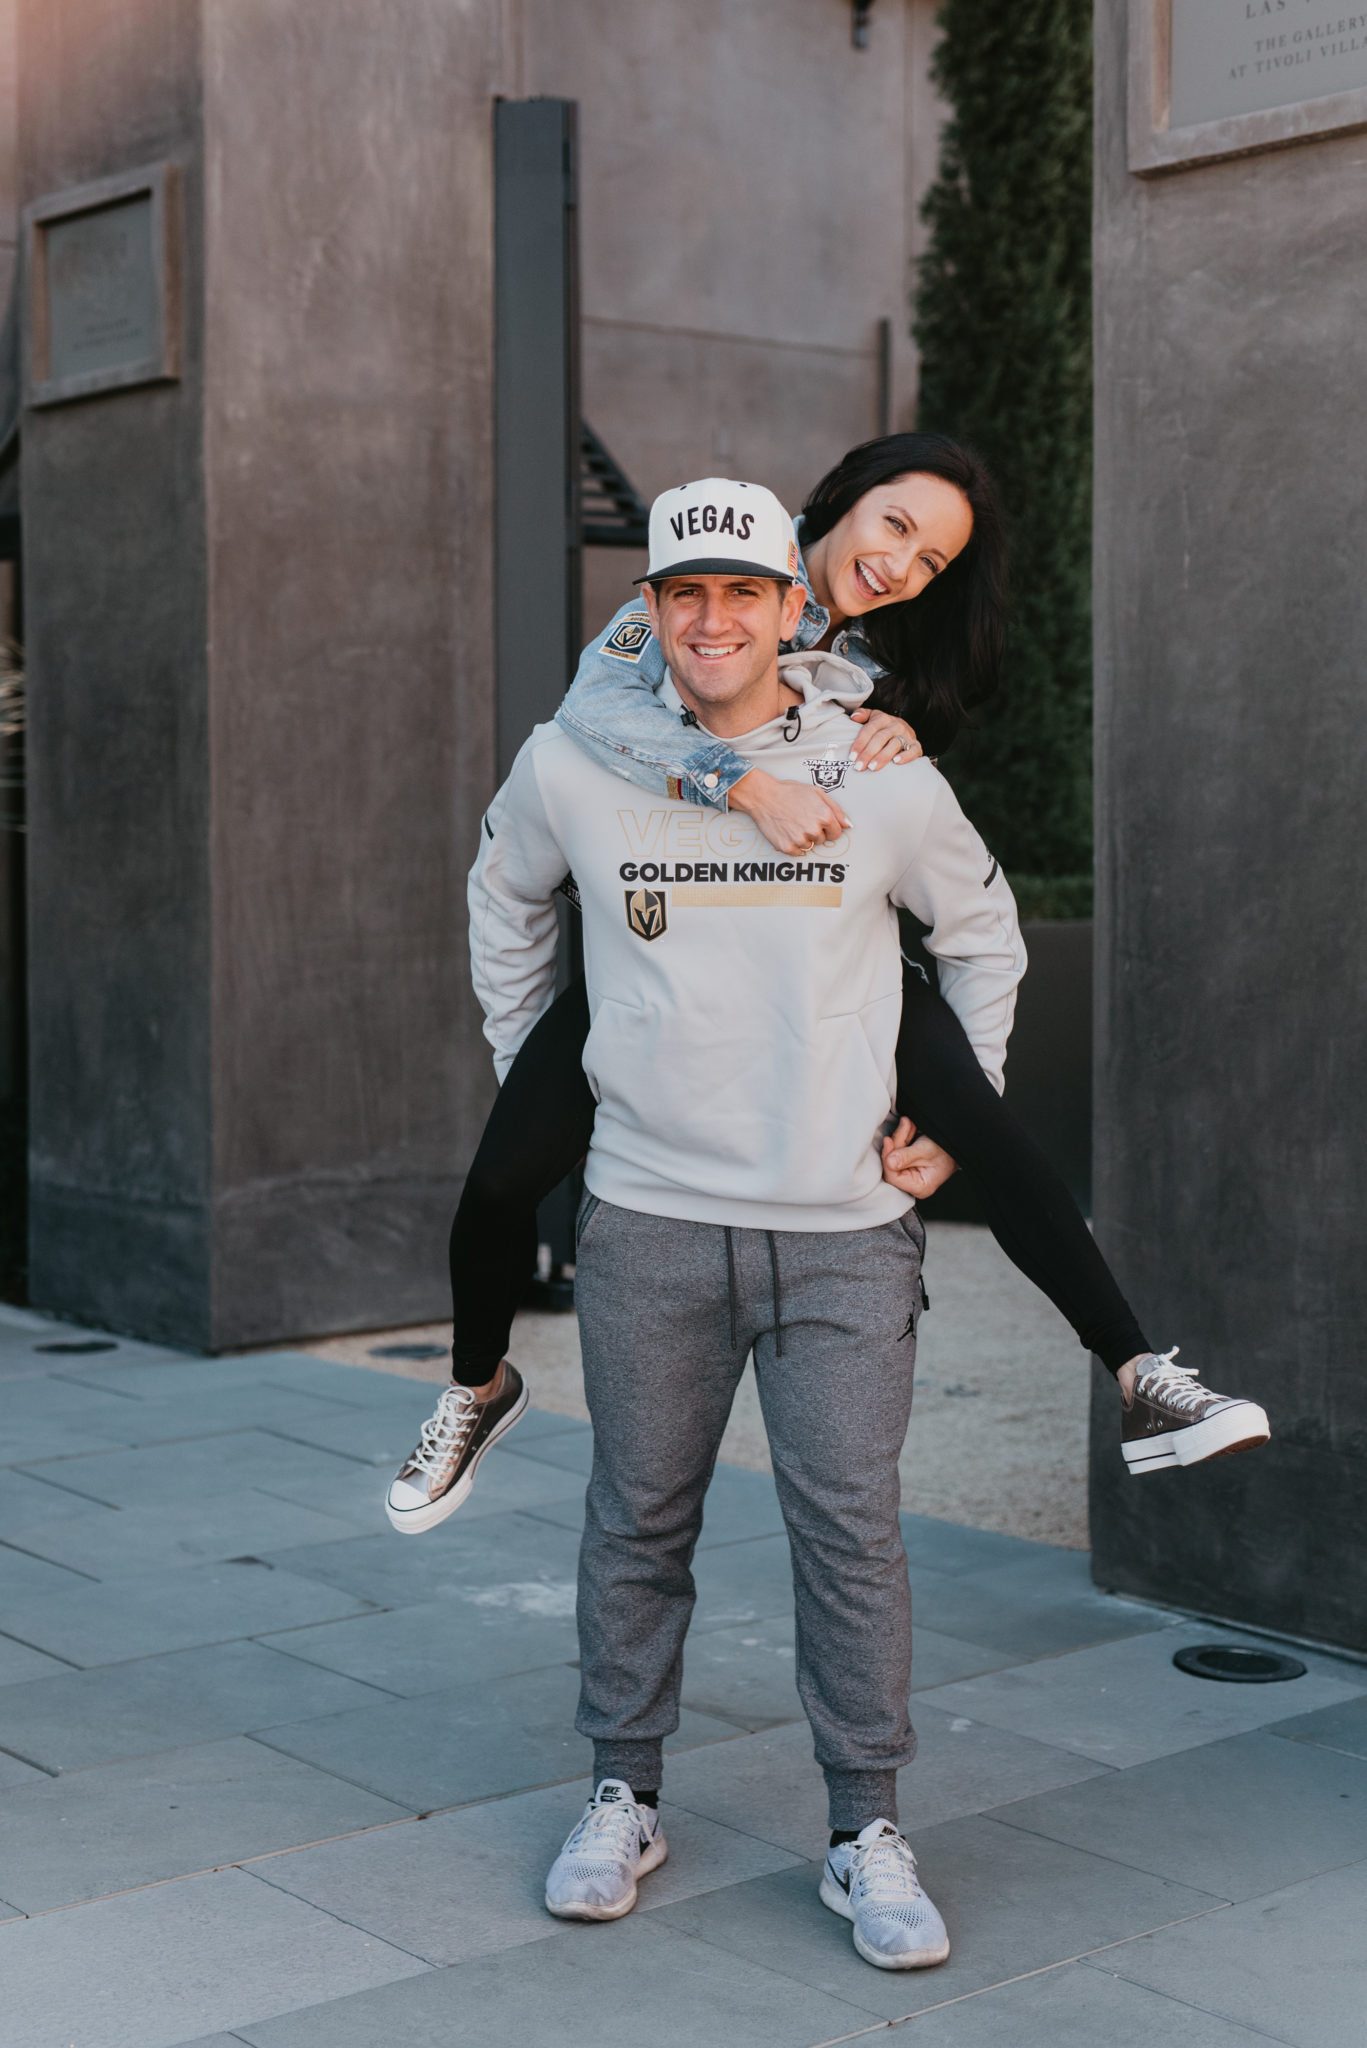 13 Best Holiday Gifts for Him featured by top Las Vegas life and style blog, Outfits & Outings: image of a couple in a street smiling